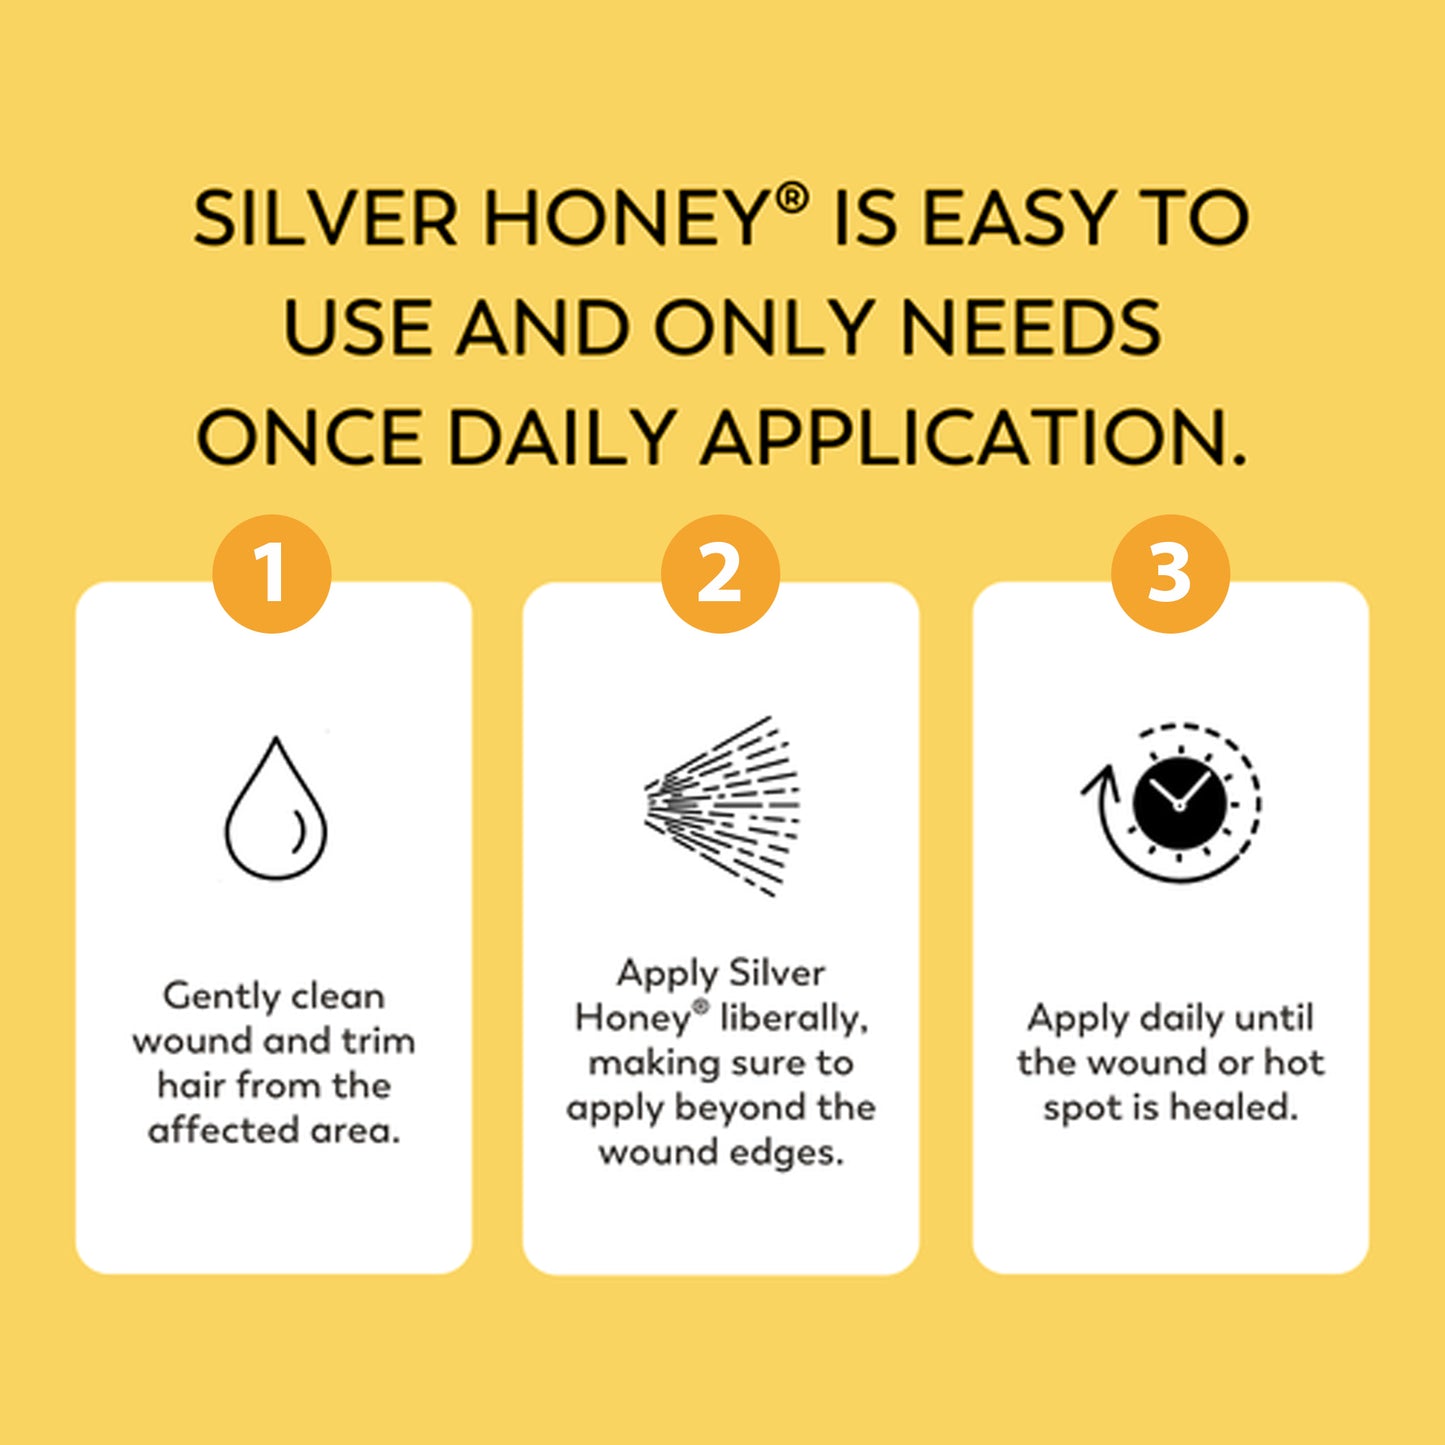 Silver Honey is easy to user and only needs one daily application. Instructions 1) clean wound and trim hair from the affected area. 2) Apply Silver Honey liberally, making sure to apply beyond the wound edges. 3) Apply daily until the wound or hot spot is healed.